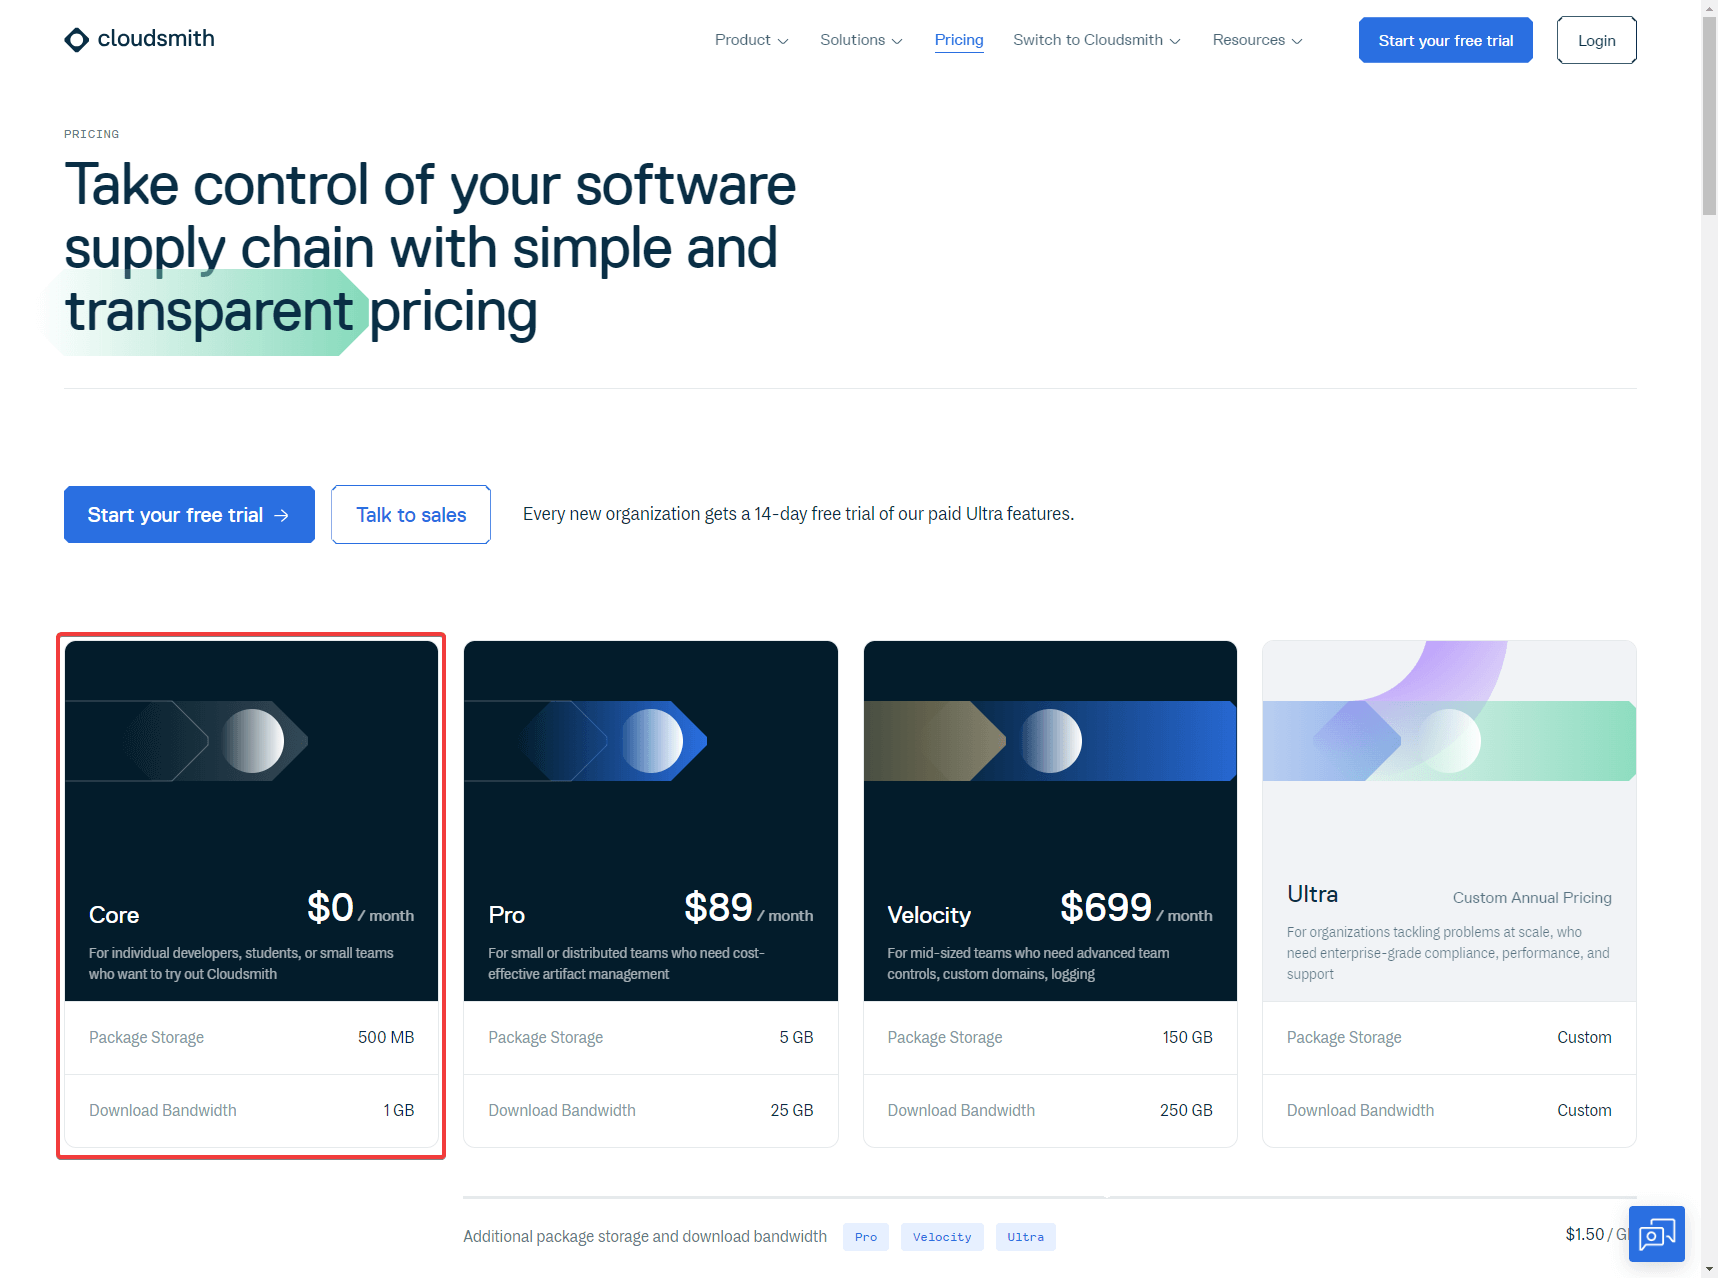 Cloudsmith showcasing the core pricing